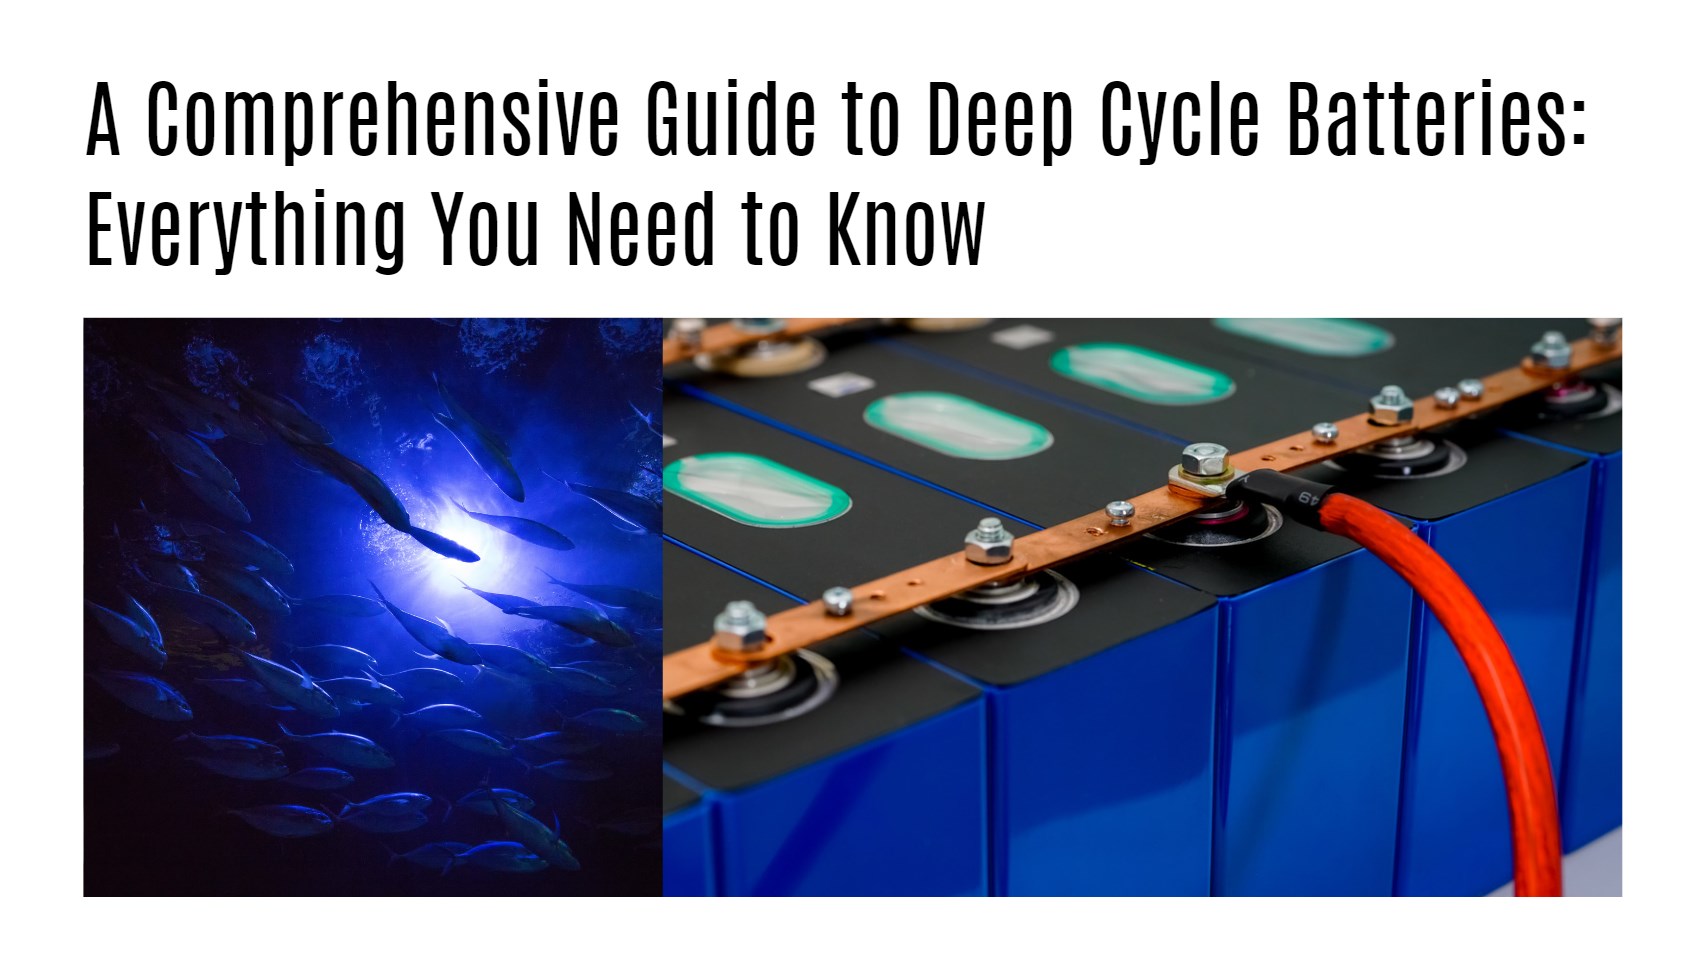 A Comprehensive Guide to Deep Cycle Batteries: Everything You Need to Know